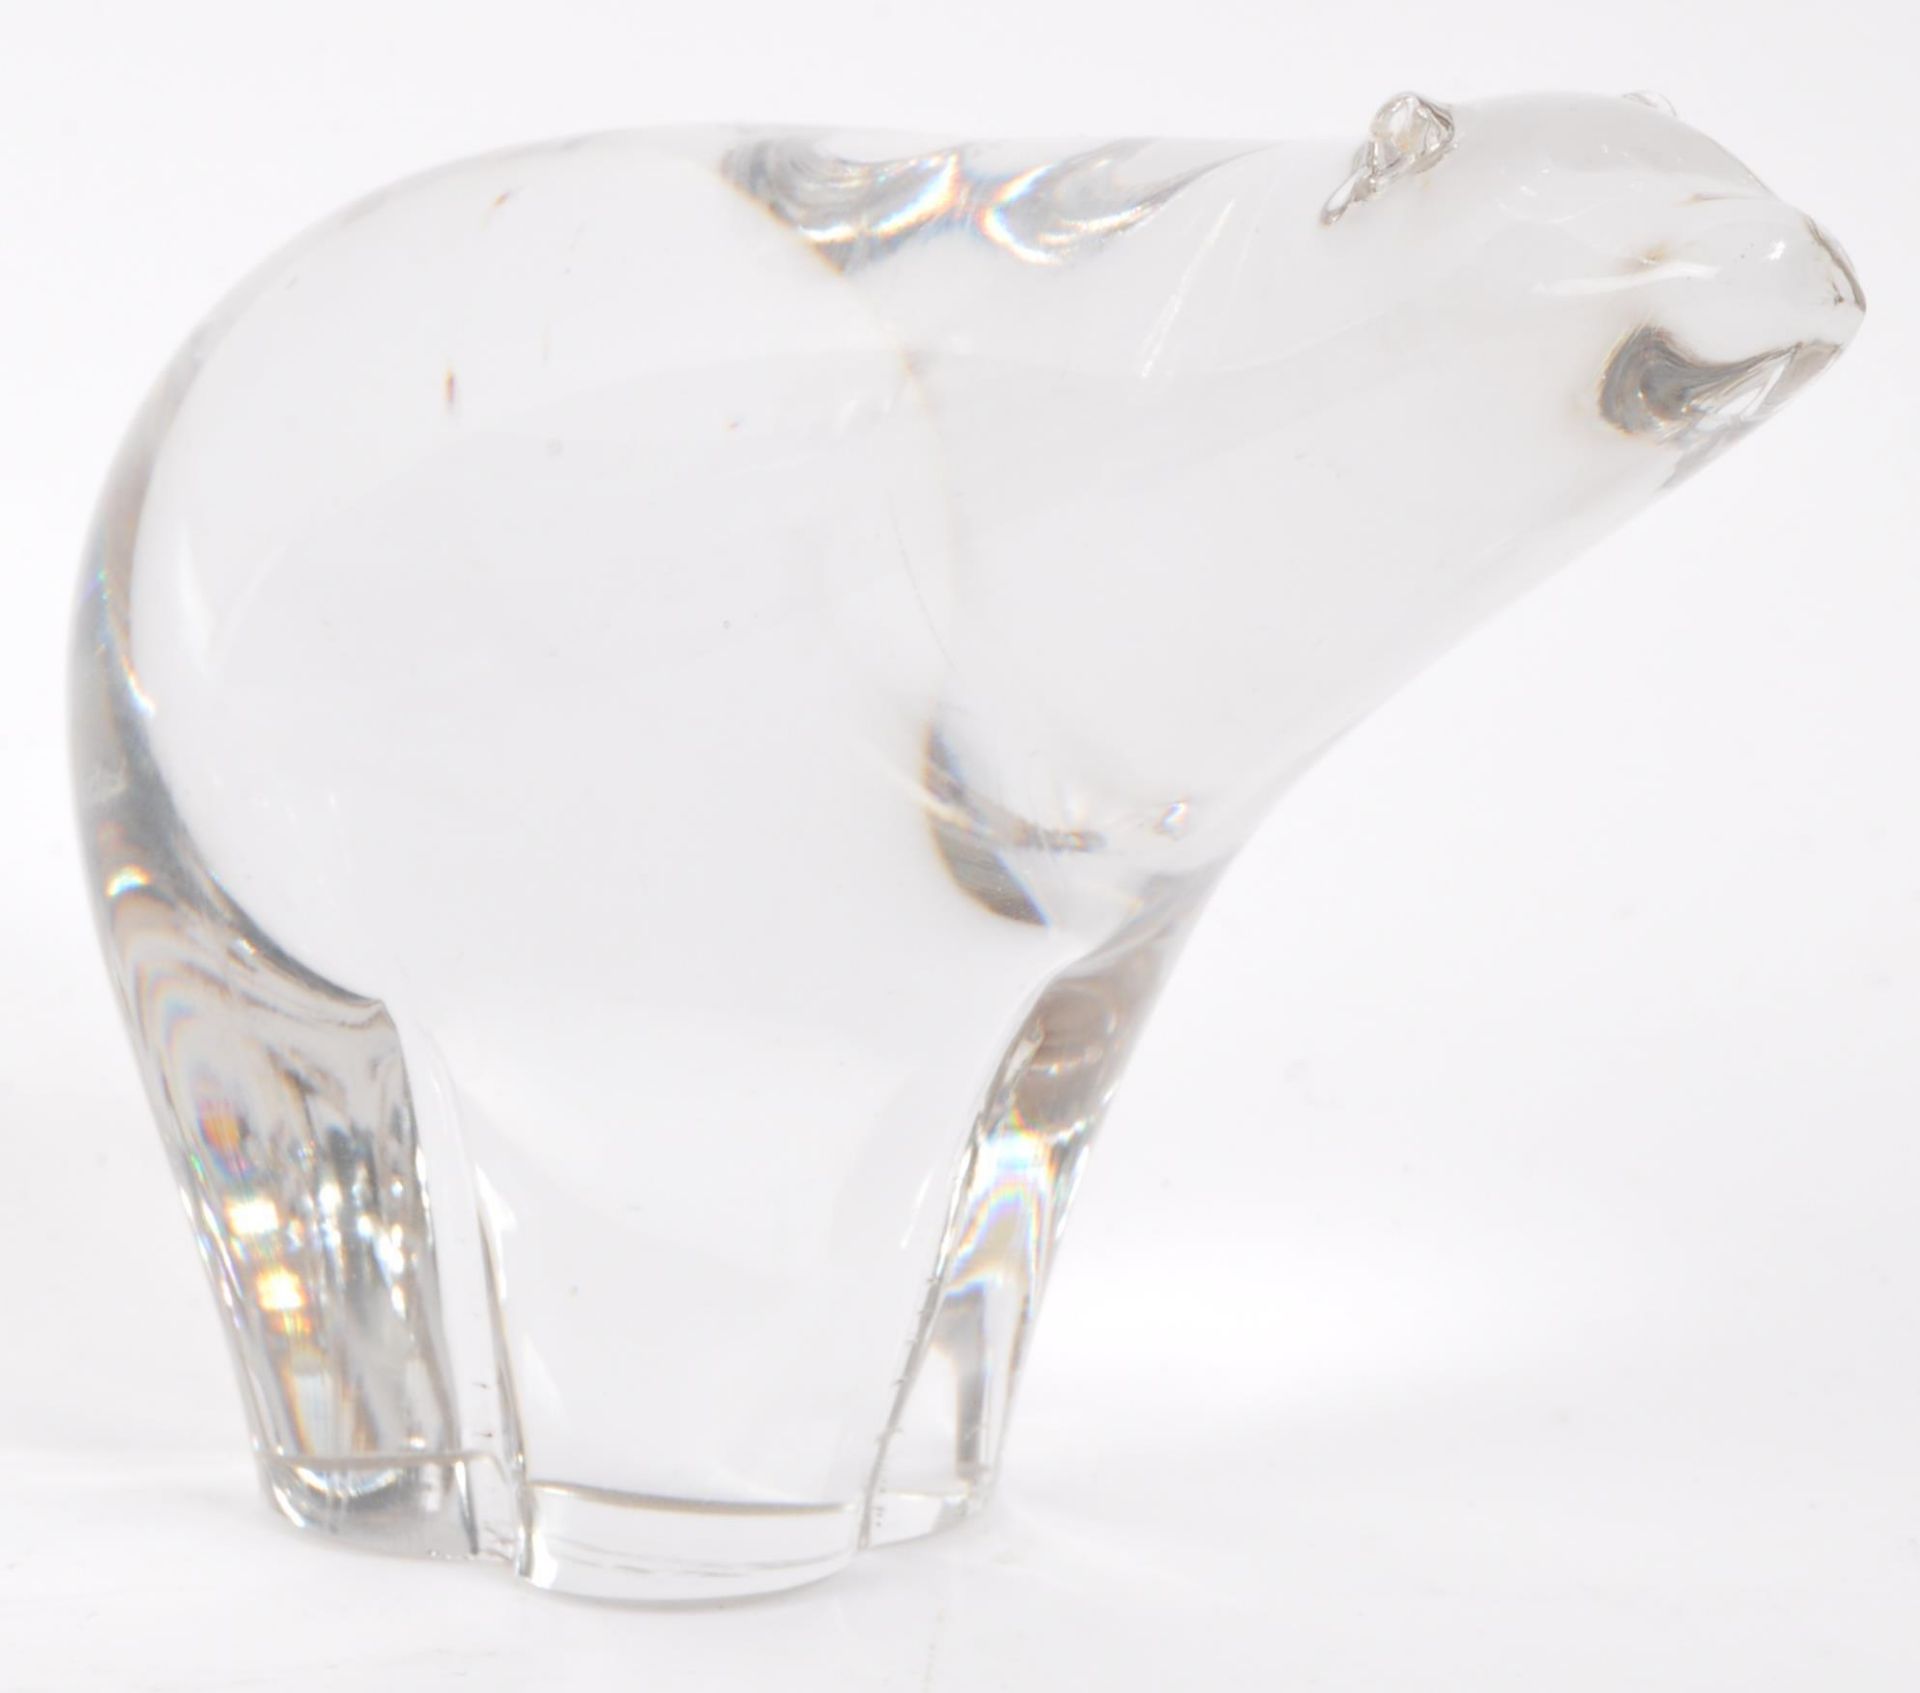 TWO ART GLASS DOLPHIN & POLAR BEAR FIGURINES BY WEDGWOOD - Image 3 of 7